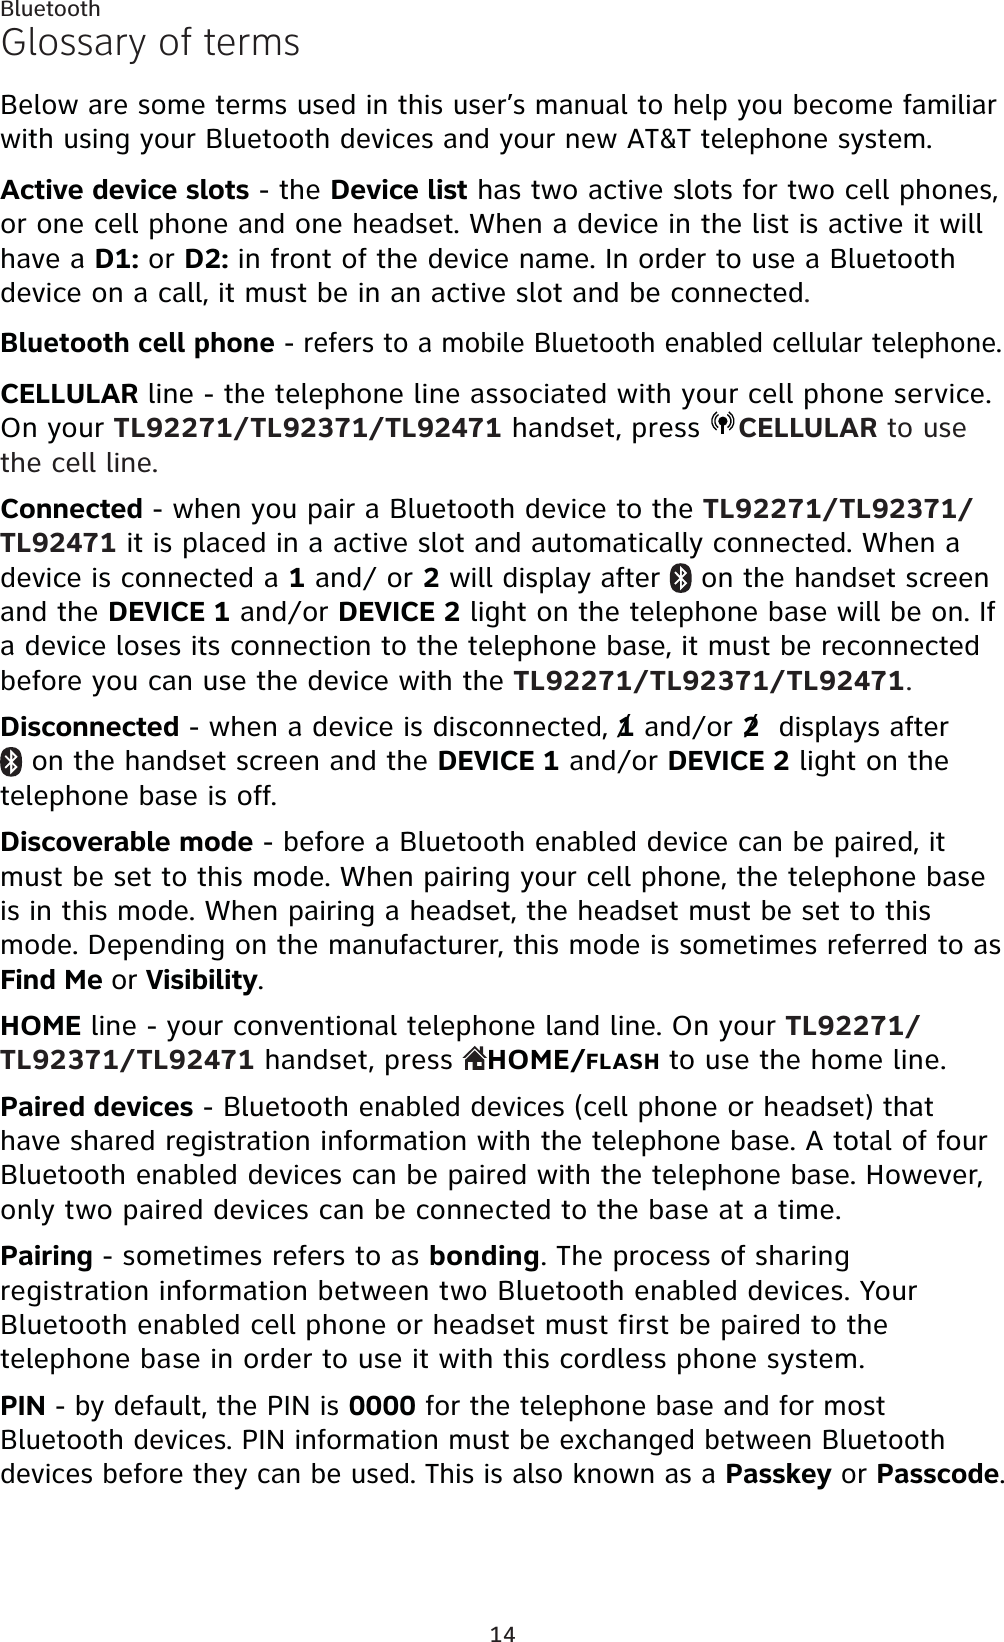 14BluetoothGlossary of termsBelow are some terms used in this user’s manual to help you become familiar with using your Bluetooth devices and your new AT&amp;T telephone system. Active device slots - the Device list has two active slots for two cell phones, or one cell phone and one headset. When a device in the list is active it will have a D1: or D2: in front of the device name. In order to use a Bluetooth device on a call, it must be in an active slot and be connected.Bluetooth cell phone - refers to a mobile Bluetooth enabled cellular telephone.CELLULAR line - the telephone line associated with your cell phone service. On your TL92271/TL92371/TL92471 handset, press  CELLULAR to use the cell line.Connected - when you pair a Bluetooth device to the TL92271/TL92371/TL92471 it is placed in a active slot and automatically connected. When a device is connected a 1 and/ or 2 will display after   on the handset screen and the DEVICE 1 and/or DEVICE 2 light on the telephone base will be on. If a device loses its connection to the telephone base, it must be reconnected before you can use the device with the TL92271/TL92371/TL92471.Disconnected - when a device is disconnected, 1 and/or 2  displays after  on the handset screen and the DEVICE 1 and/or DEVICE 2 light on the telephone base is off.Discoverable mode - before a Bluetooth enabled device can be paired, it must be set to this mode. When pairing your cell phone, the telephone base is in this mode. When pairing a headset, the headset must be set to this mode. Depending on the manufacturer, this mode is sometimes referred to as Find Me or Visibility.HOME line - your conventional telephone land line. On your TL92271/TL92371/TL92471 handset, press  HOME/FLASH to use the home line.Paired devices - Bluetooth enabled devices (cell phone or headset) that have shared registration information with the telephone base. A total of four Bluetooth enabled devices can be paired with the telephone base. However, only two paired devices can be connected to the base at a time.Pairing - sometimes refers to as bonding. The process of sharing registration information between two Bluetooth enabled devices. Your Bluetooth enabled cell phone or headset must first be paired to the telephone base in order to use it with this cordless phone system.PIN - by default, the PIN is 0000 for the telephone base and for most Bluetooth devices. PIN information must be exchanged between Bluetooth devices before they can be used. This is also known as a Passkey or Passcode.//